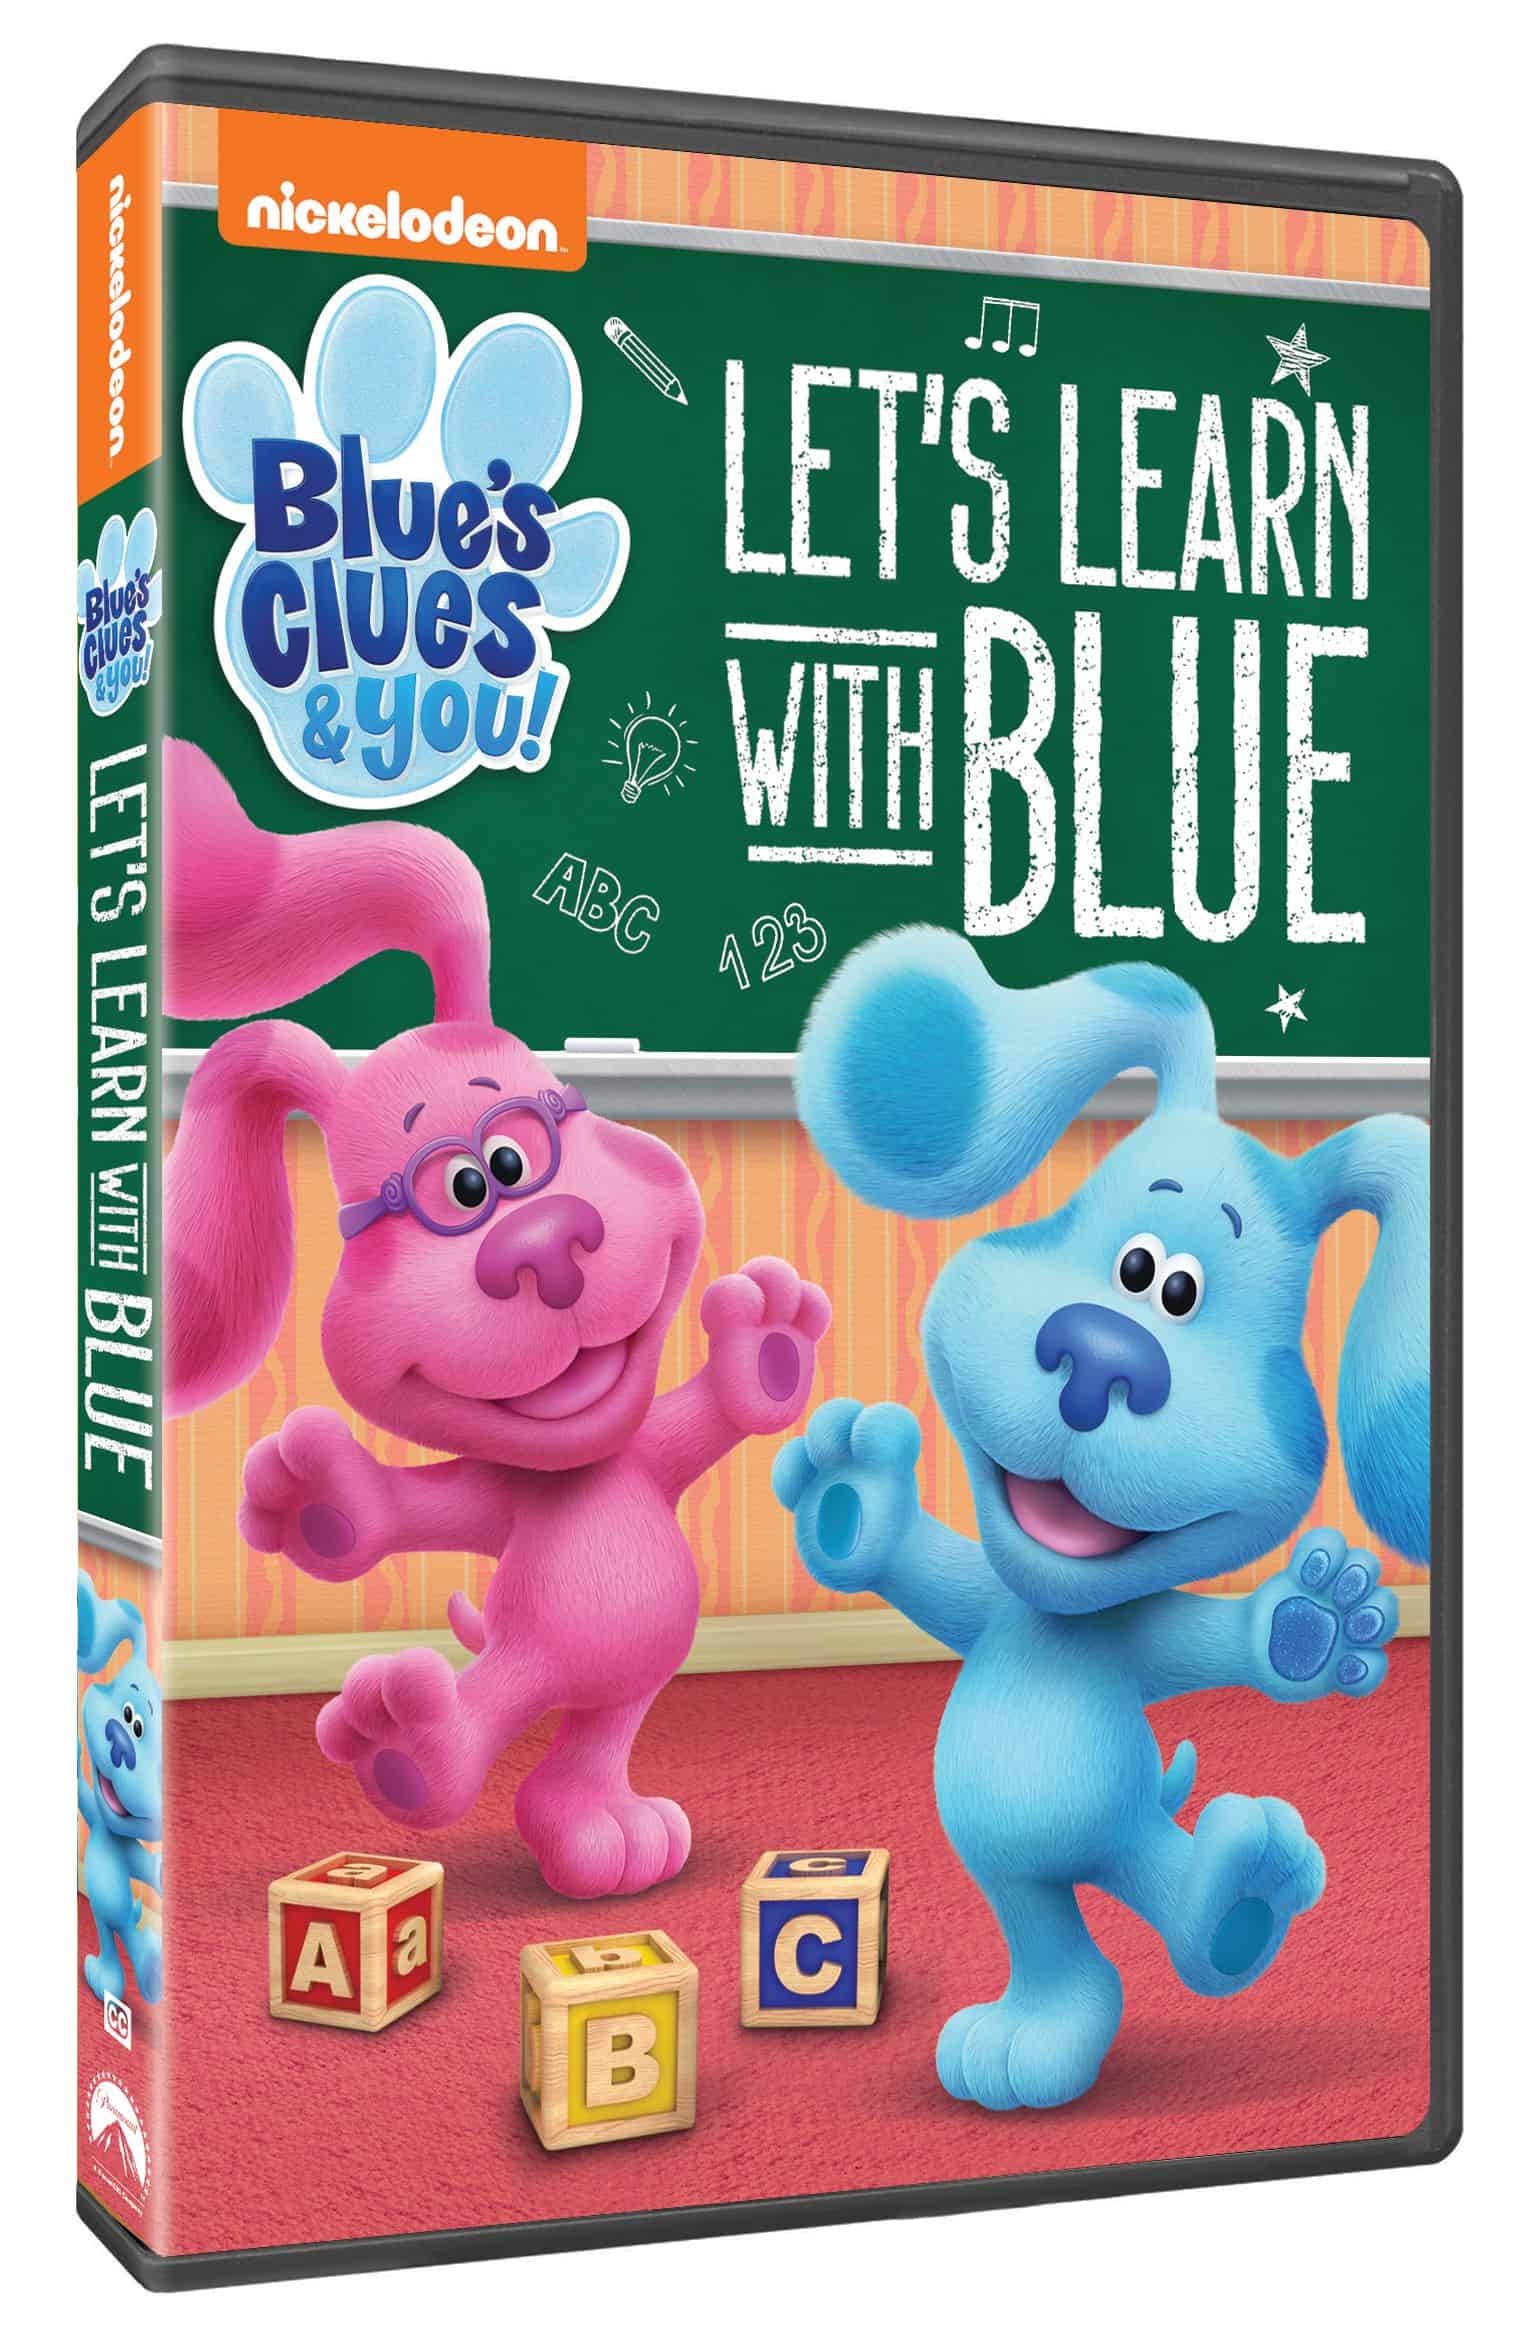 let's learn with blue dvd giveaway blues clues cover